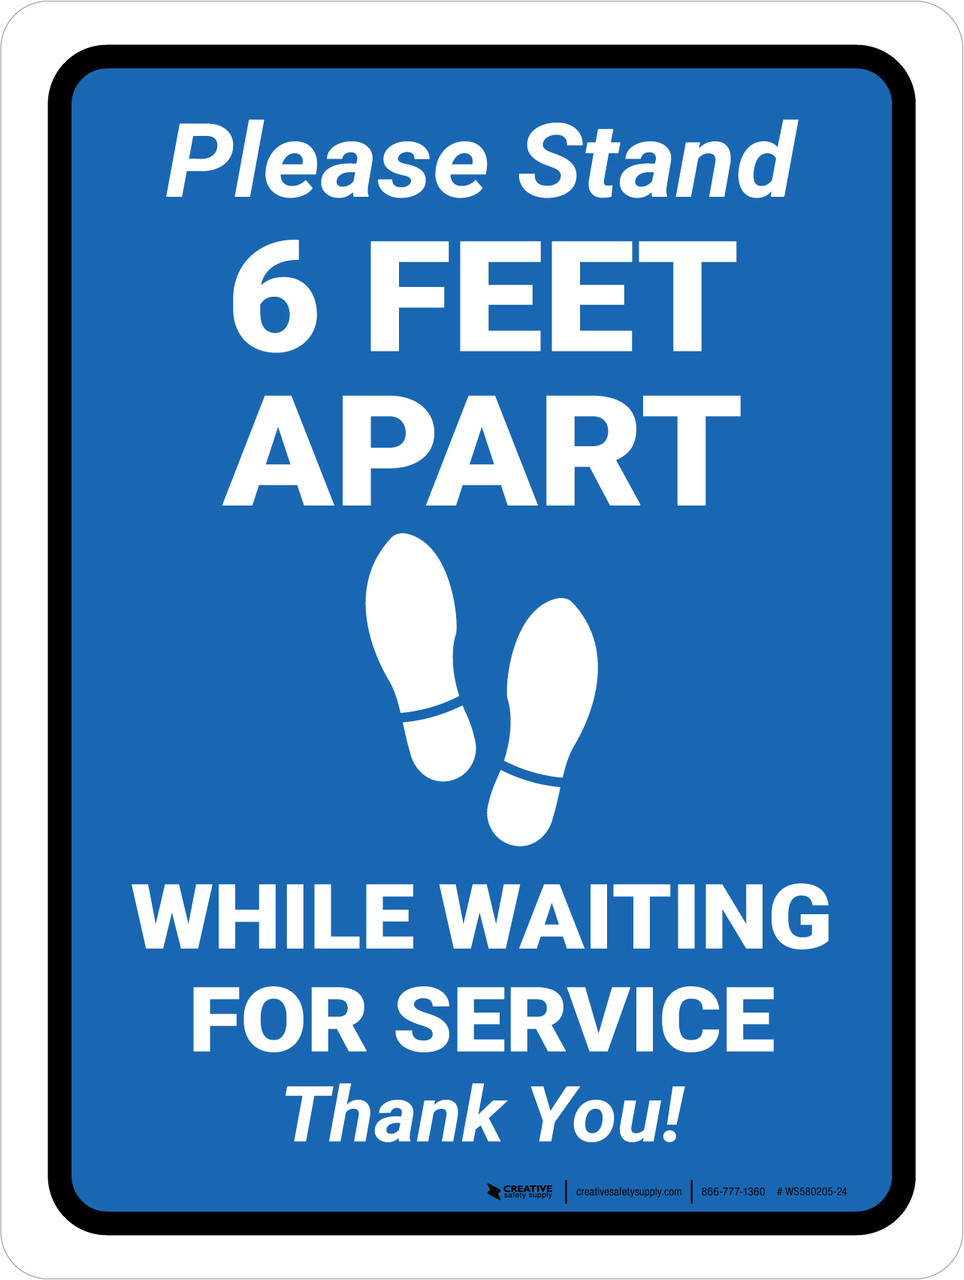 Please Stand Feet Apart While Waiting for Service Thank you! Portrait  Wall Sign